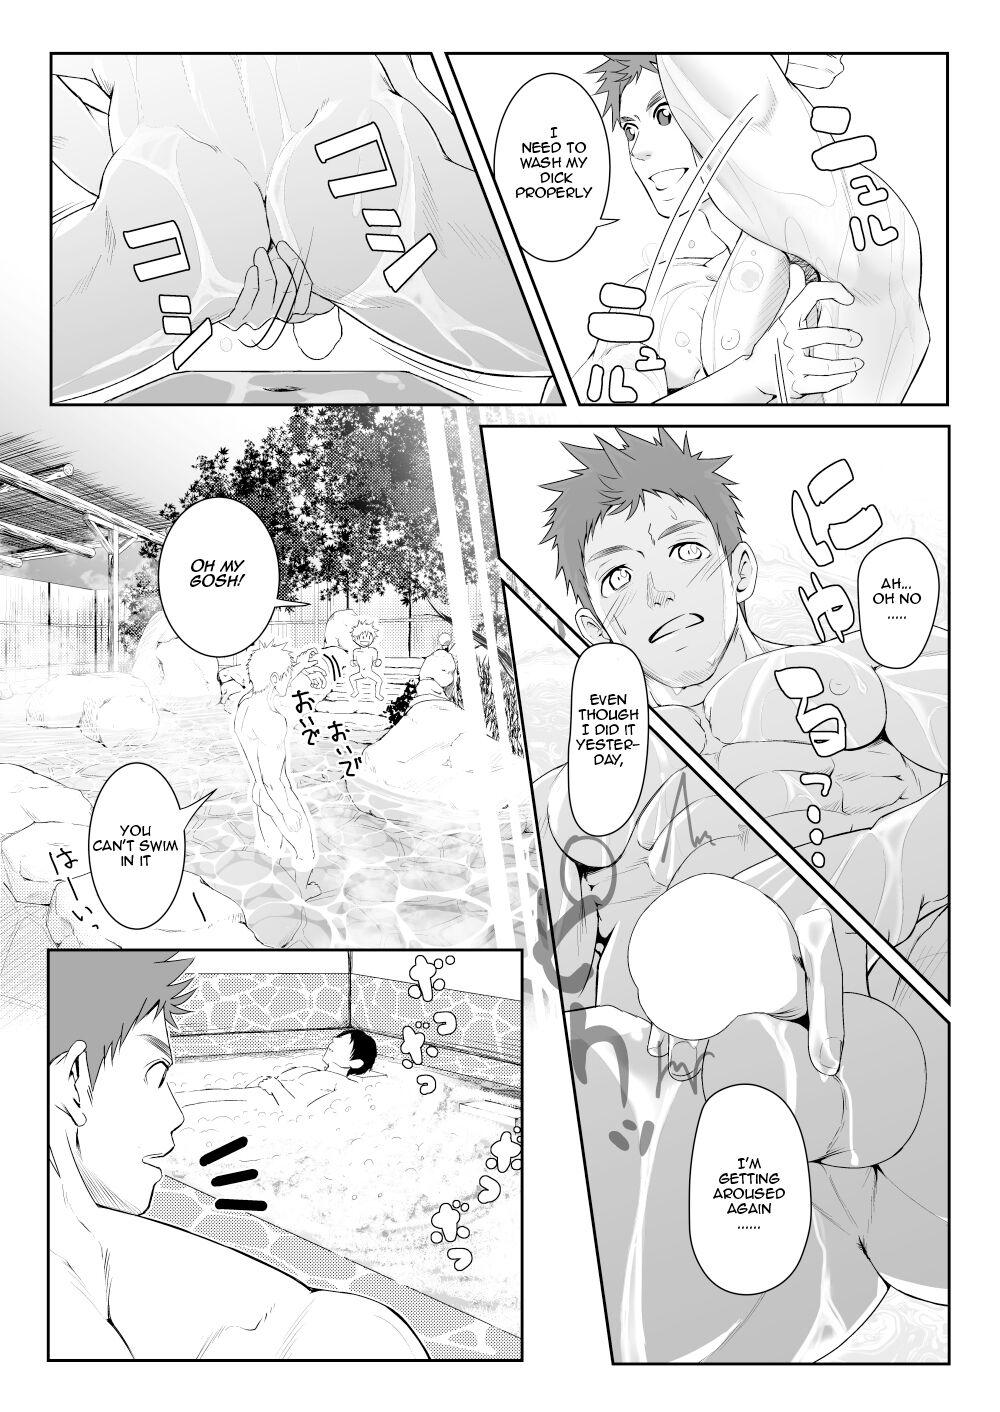 Buttfucking One Count Firsttime - Page 8